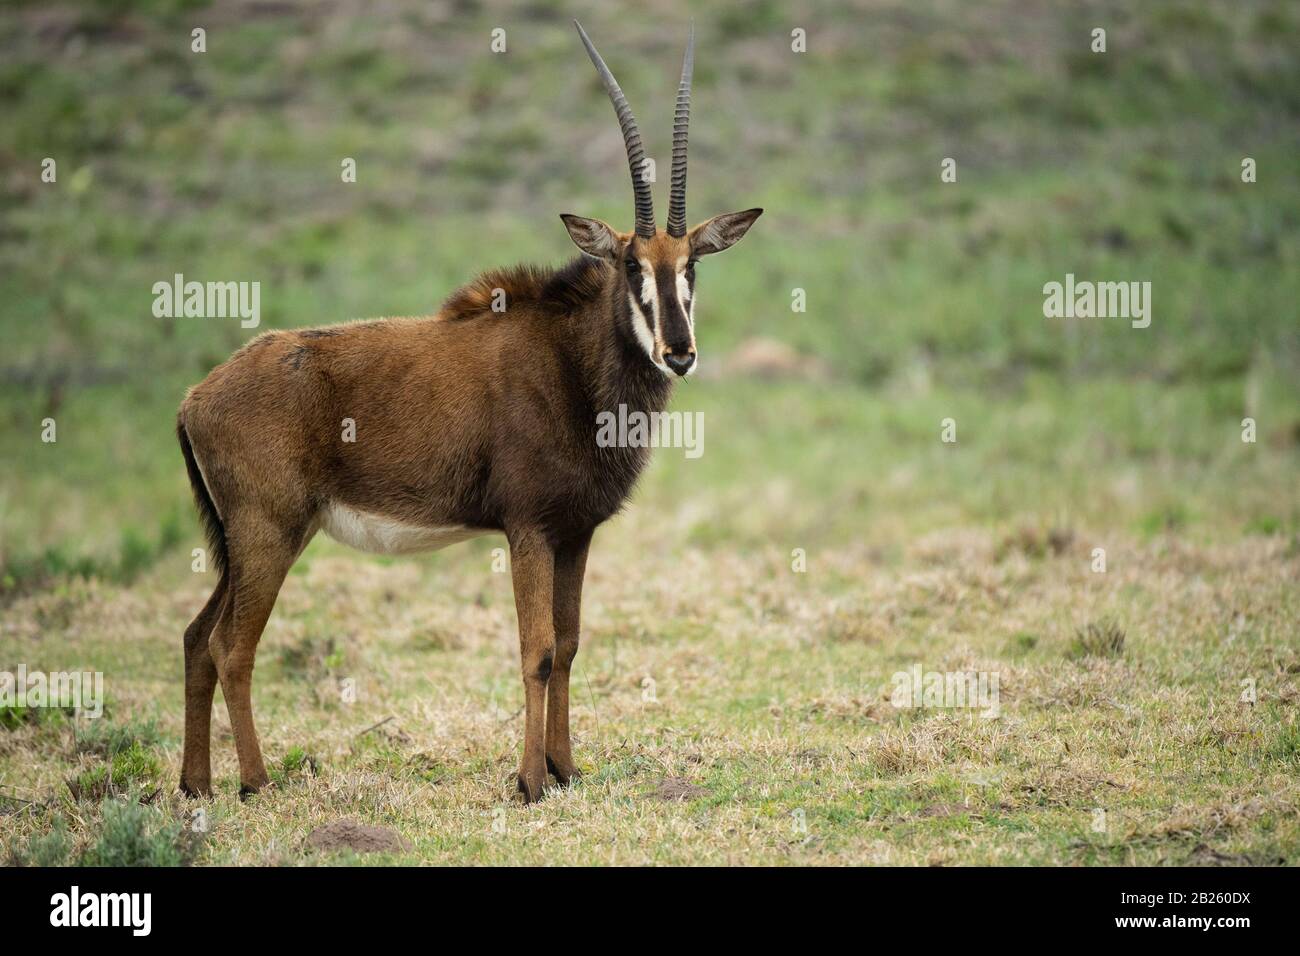 Sable antelope, Hippotragus niger, Gondwana Game Reserve, South Africa Stock Photo